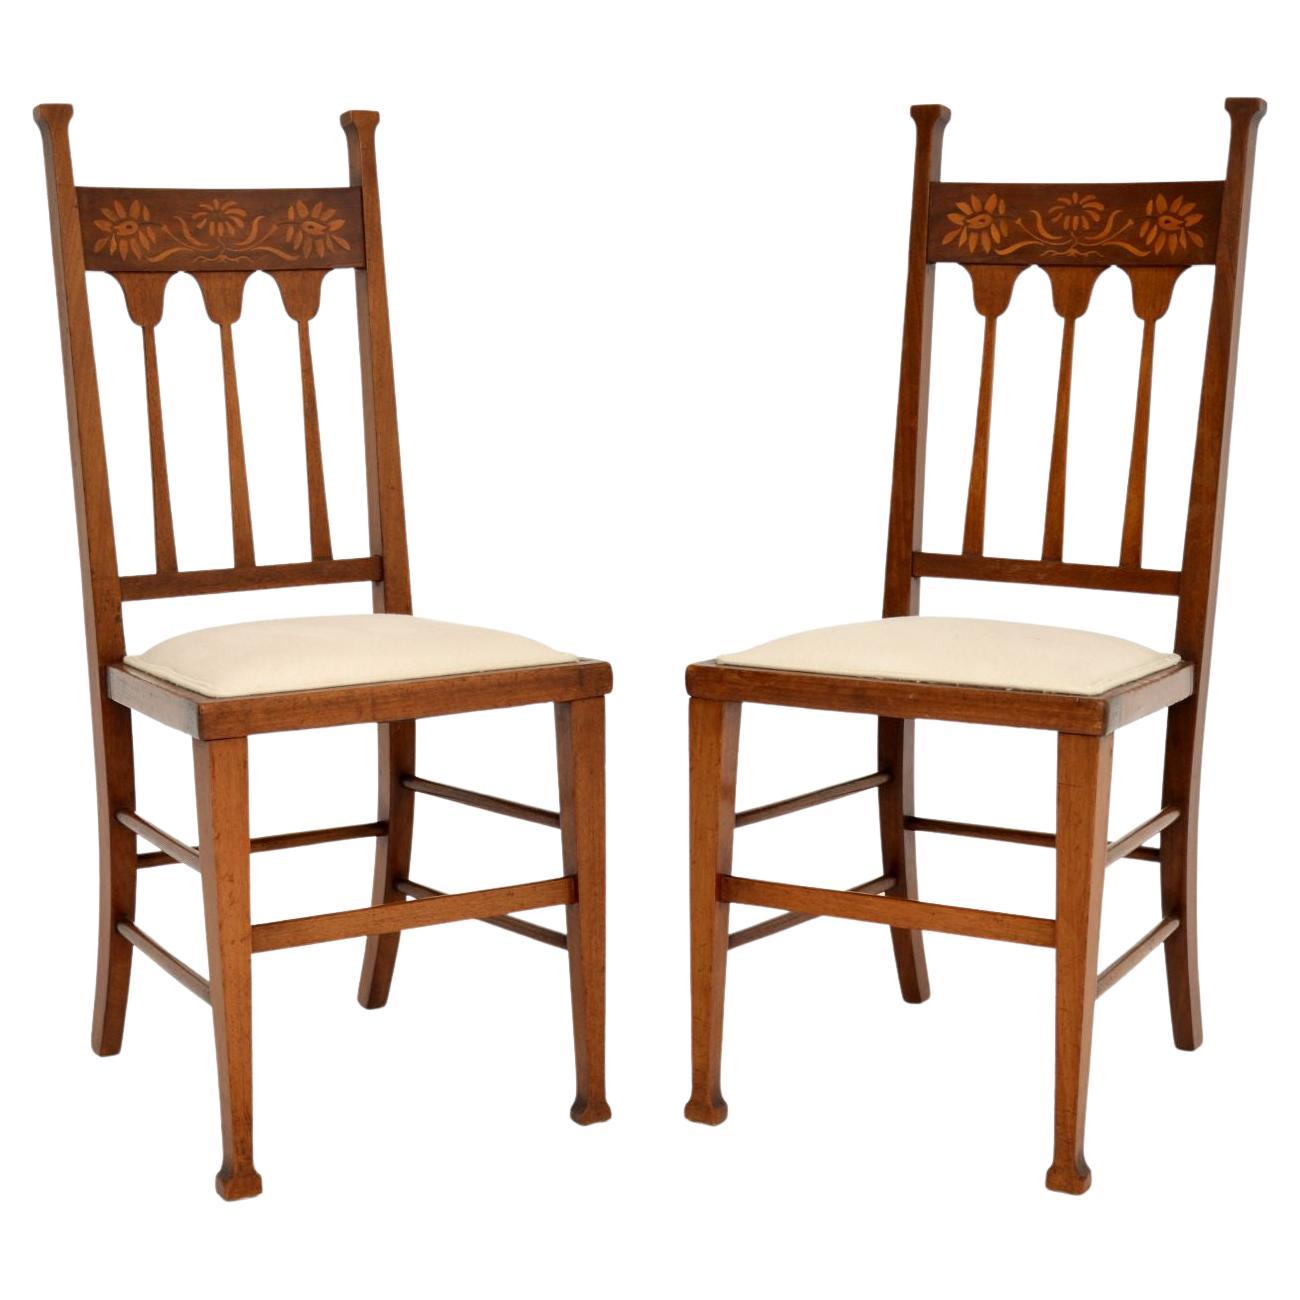 Pair of Antique Inlaid Arts & Crafts Side Chairs